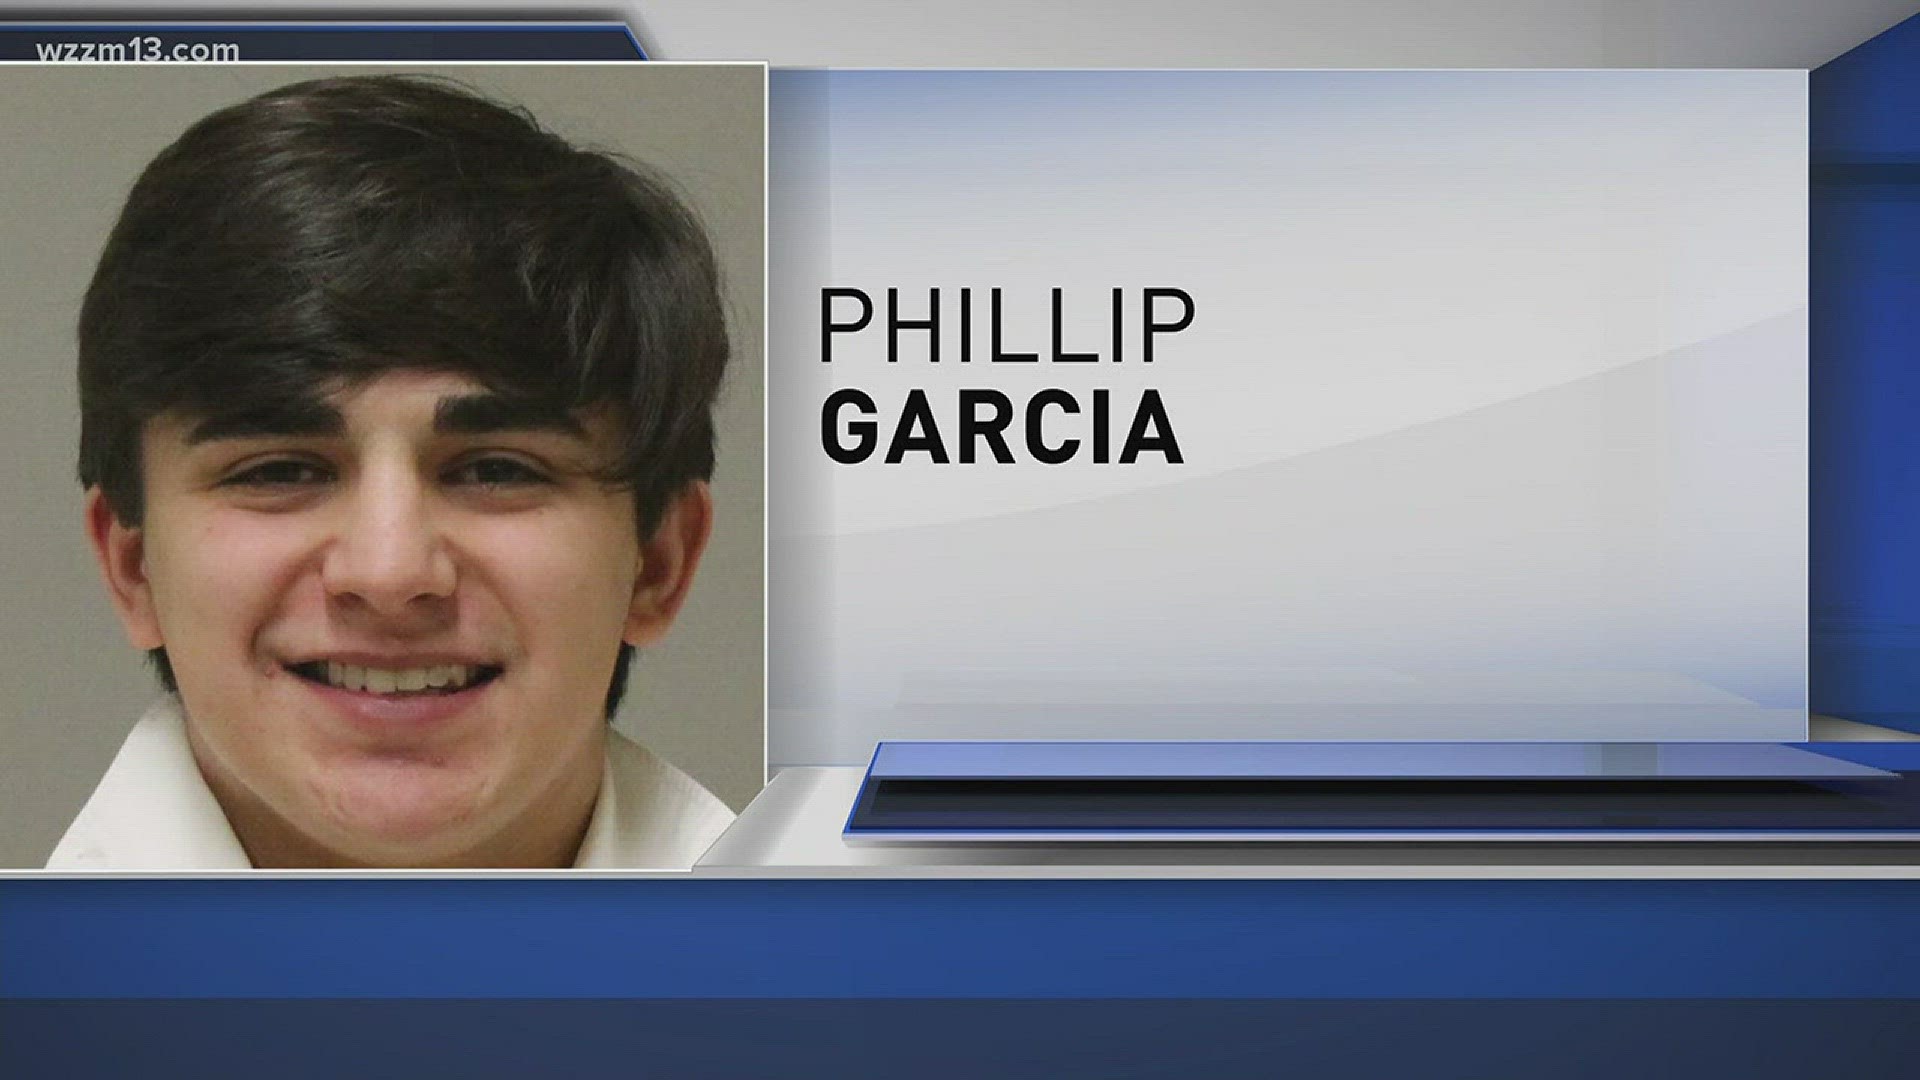 Phillip Garcia went through a stop sign, hitting another car killing the driver.